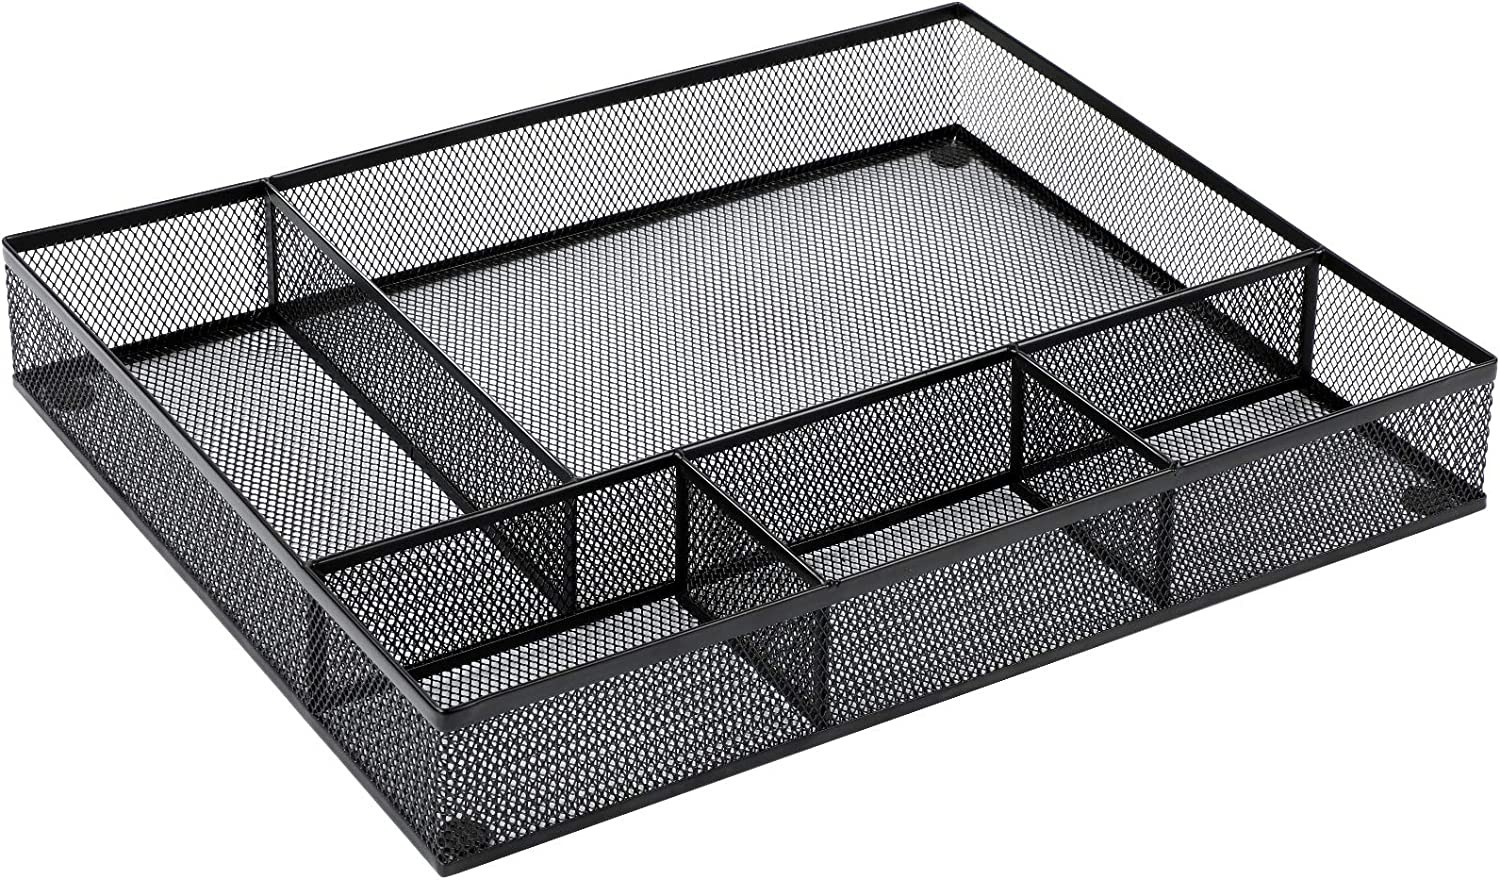 US_Happy 5 Piece Large Space Desk Drawer Organizer $8 + Free S&H W/Prime or $25+